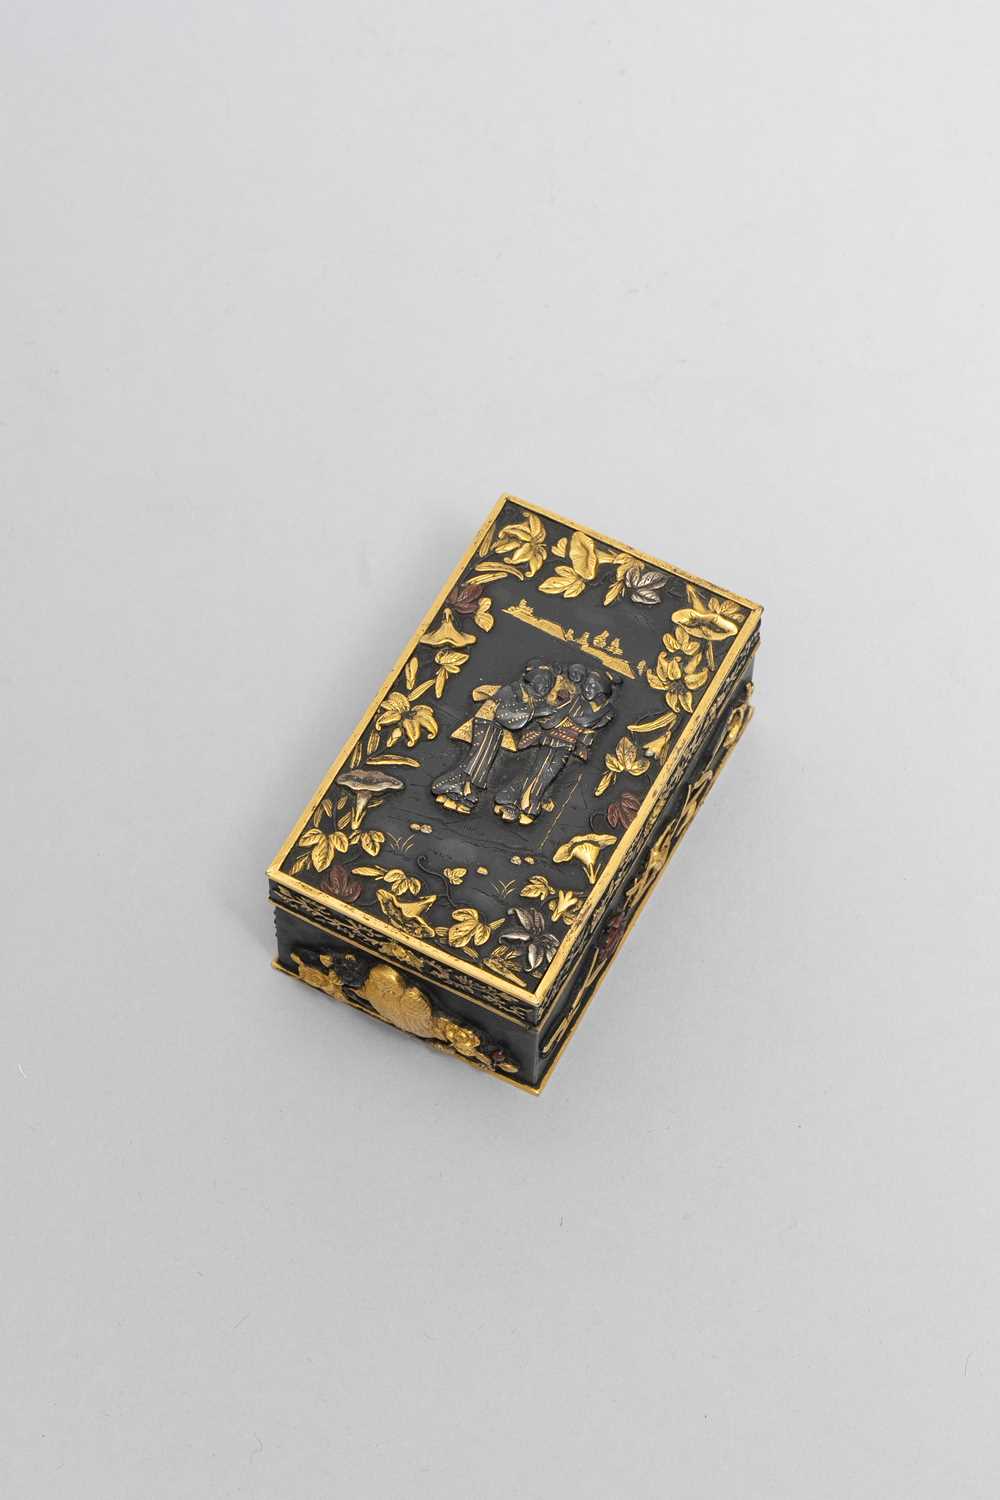 A SMALL JAPANESE GOLD AND SILVER-INLAID BOX MEIJI ERA, 19TH CENTURY Of rectangular shape with a